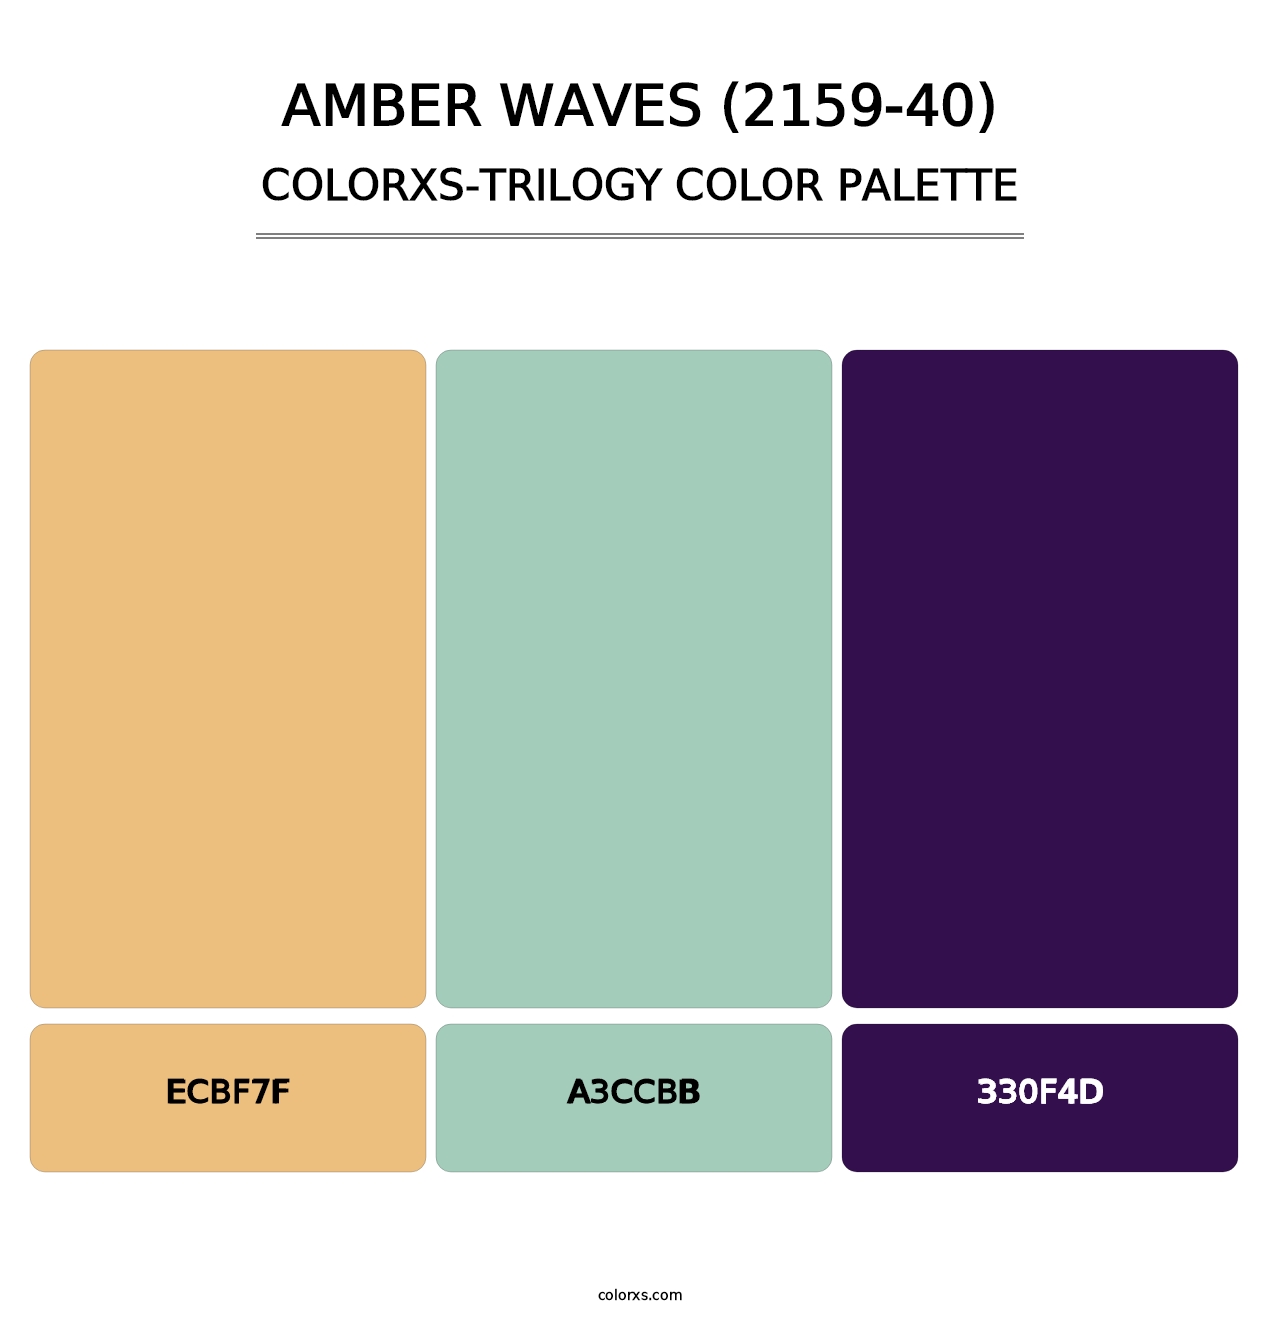 Amber Waves (2159-40) - Colorxs Trilogy Palette